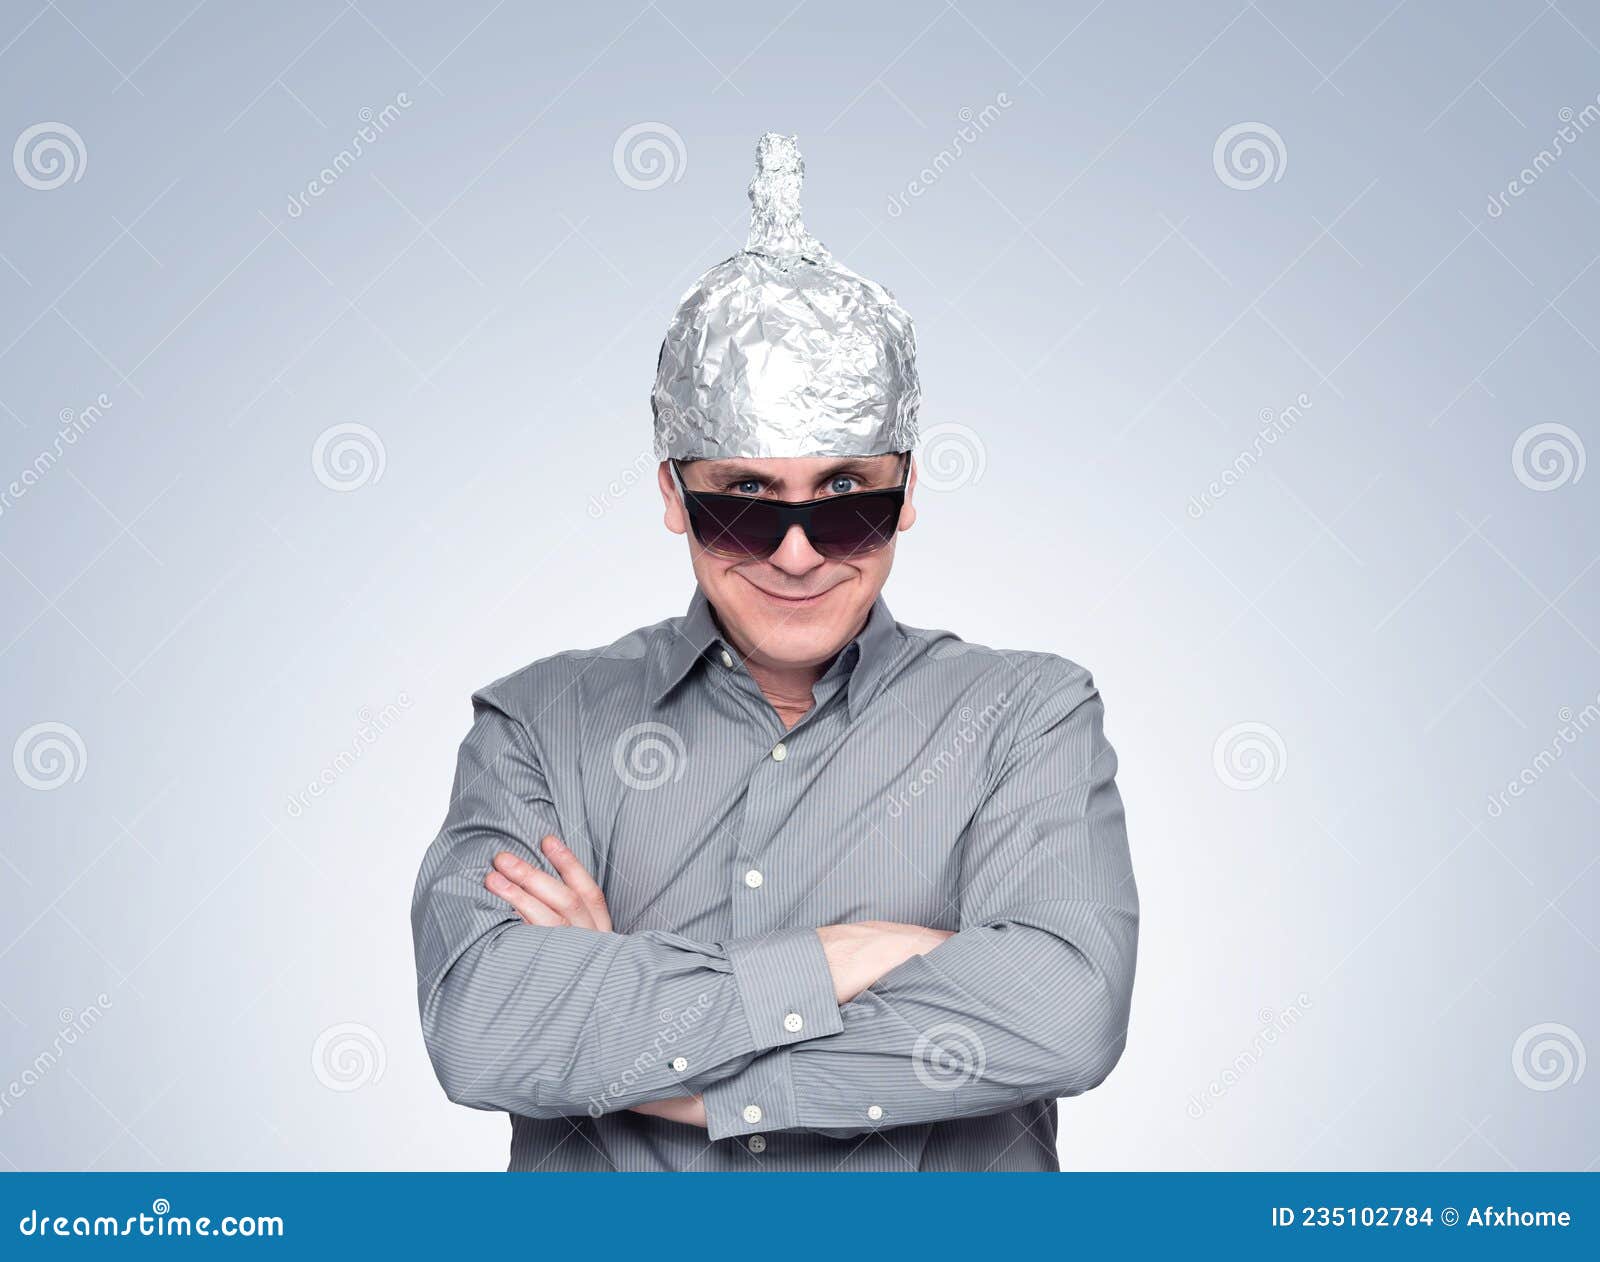 Funny Confident Smiling Man in Sunglasses and Aluminum Foil Hat, Psychic  Guru. File Contains a Path To Isolation. Stock Photo - Image of concept,  person: 235102784